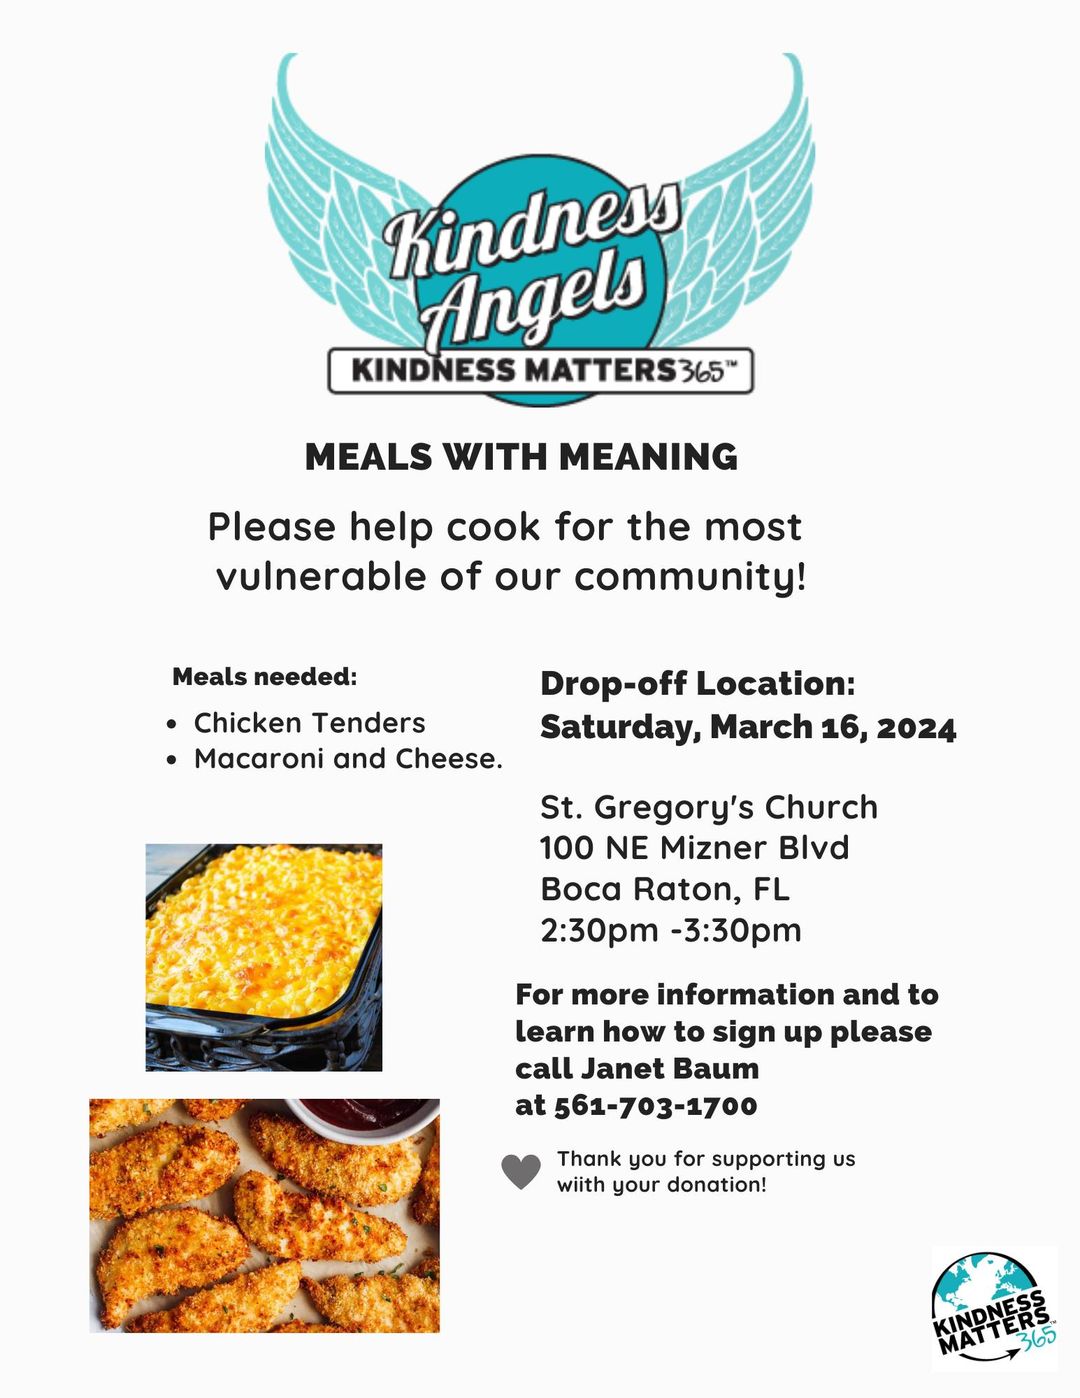 Kindness Angels Meals with Meaning